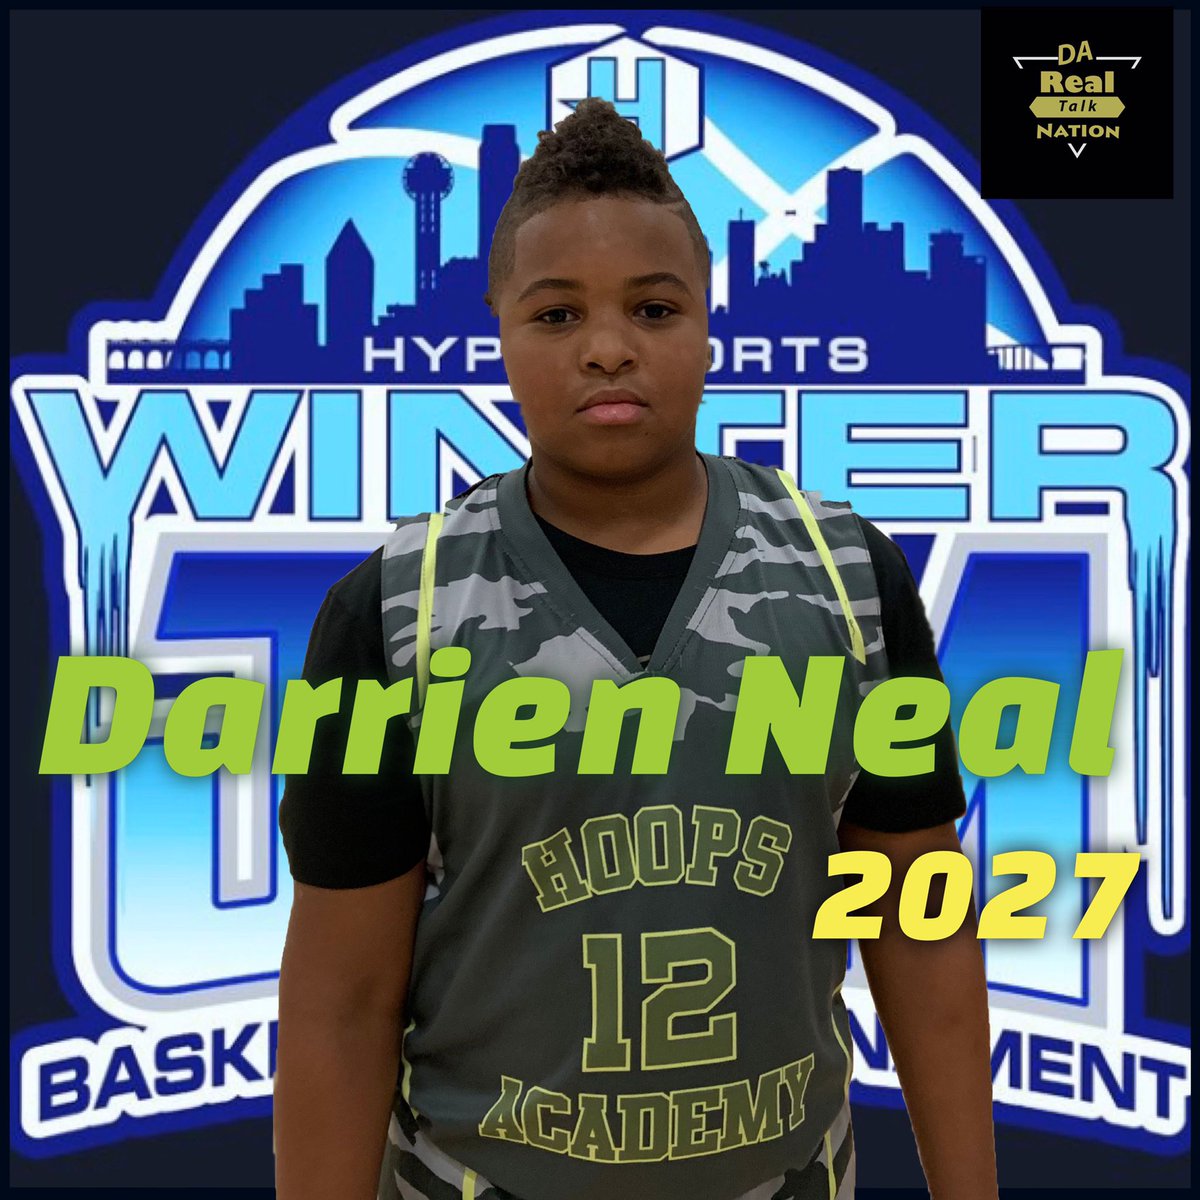 I was LIVE & DIRECT @hypesports #WinterJam2020: 5th grade big man from @3dHoopsAcademy DARRIEN NEAL was crazy good inside the paint! Catches everything off the rim,, great hands & feet,, uses his body well to shield off opponents; AUTO-BUCKET-GETTER #DaREALtalkNation